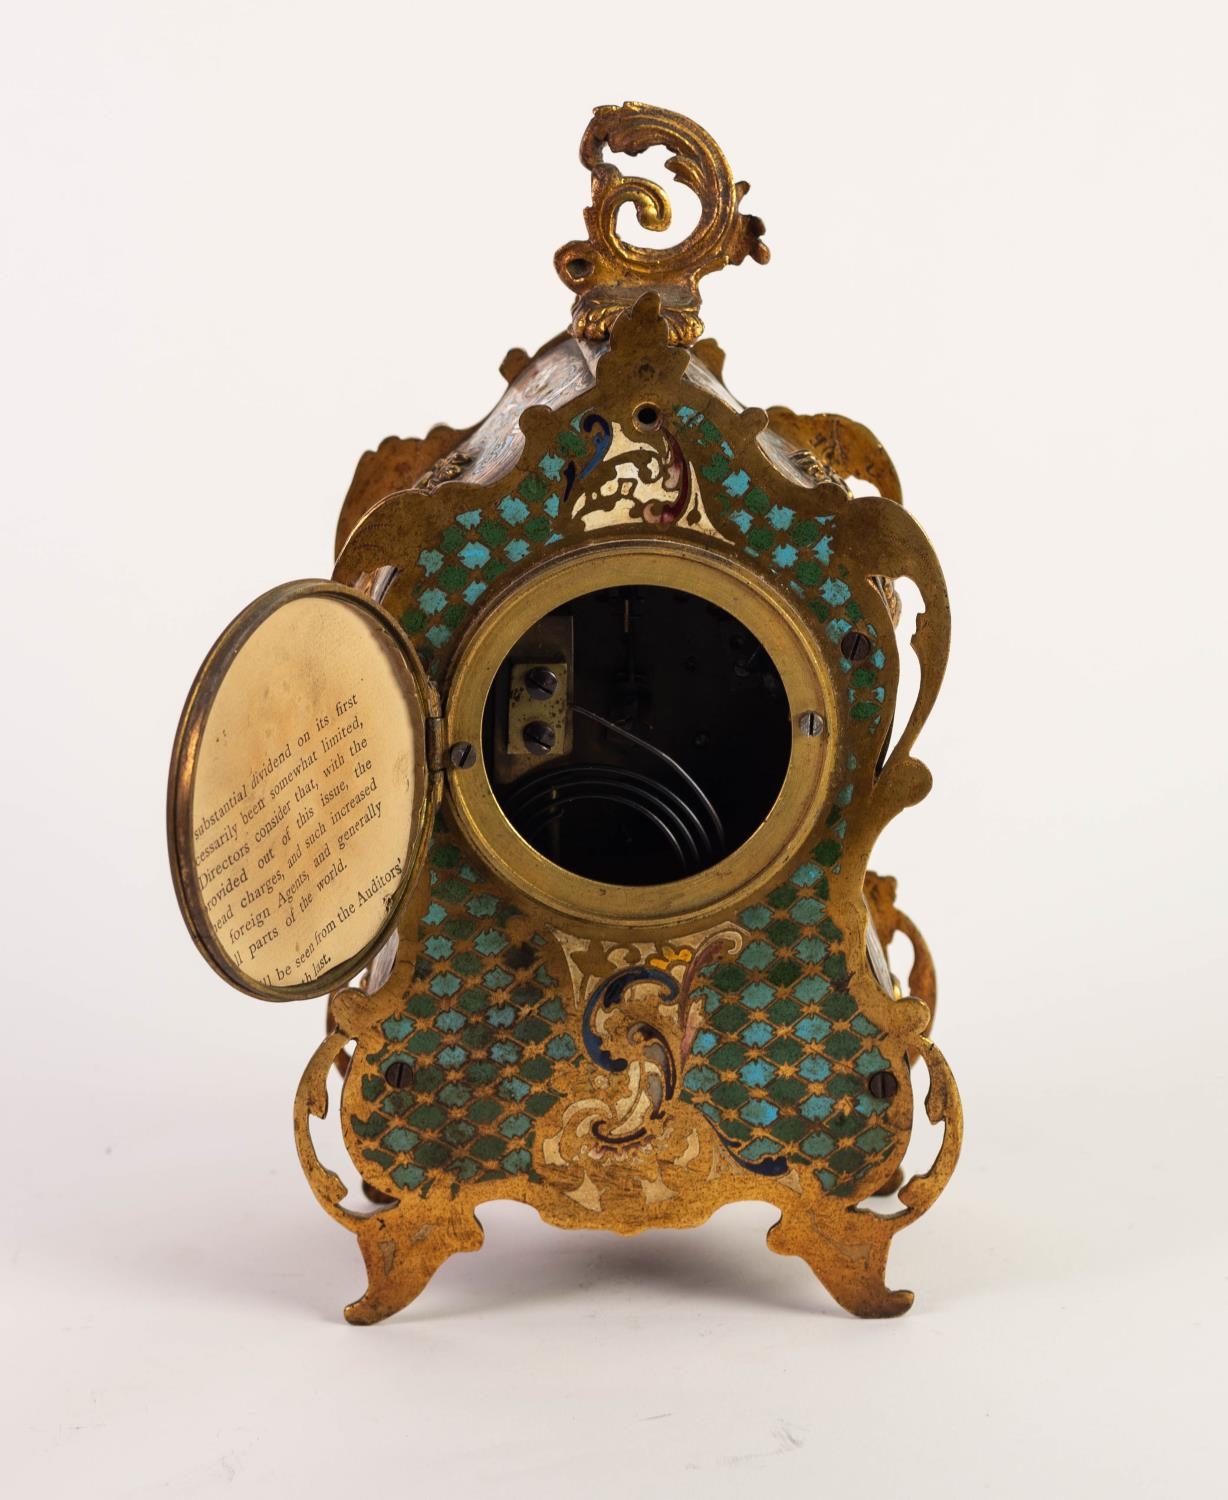 CIRCA 1900 FRENCH GILT METAL AND CHAMPLEVE ENAMEL ROCOCO REVIVAL CASED MANTEL CLOCK, the movement by - Image 7 of 8